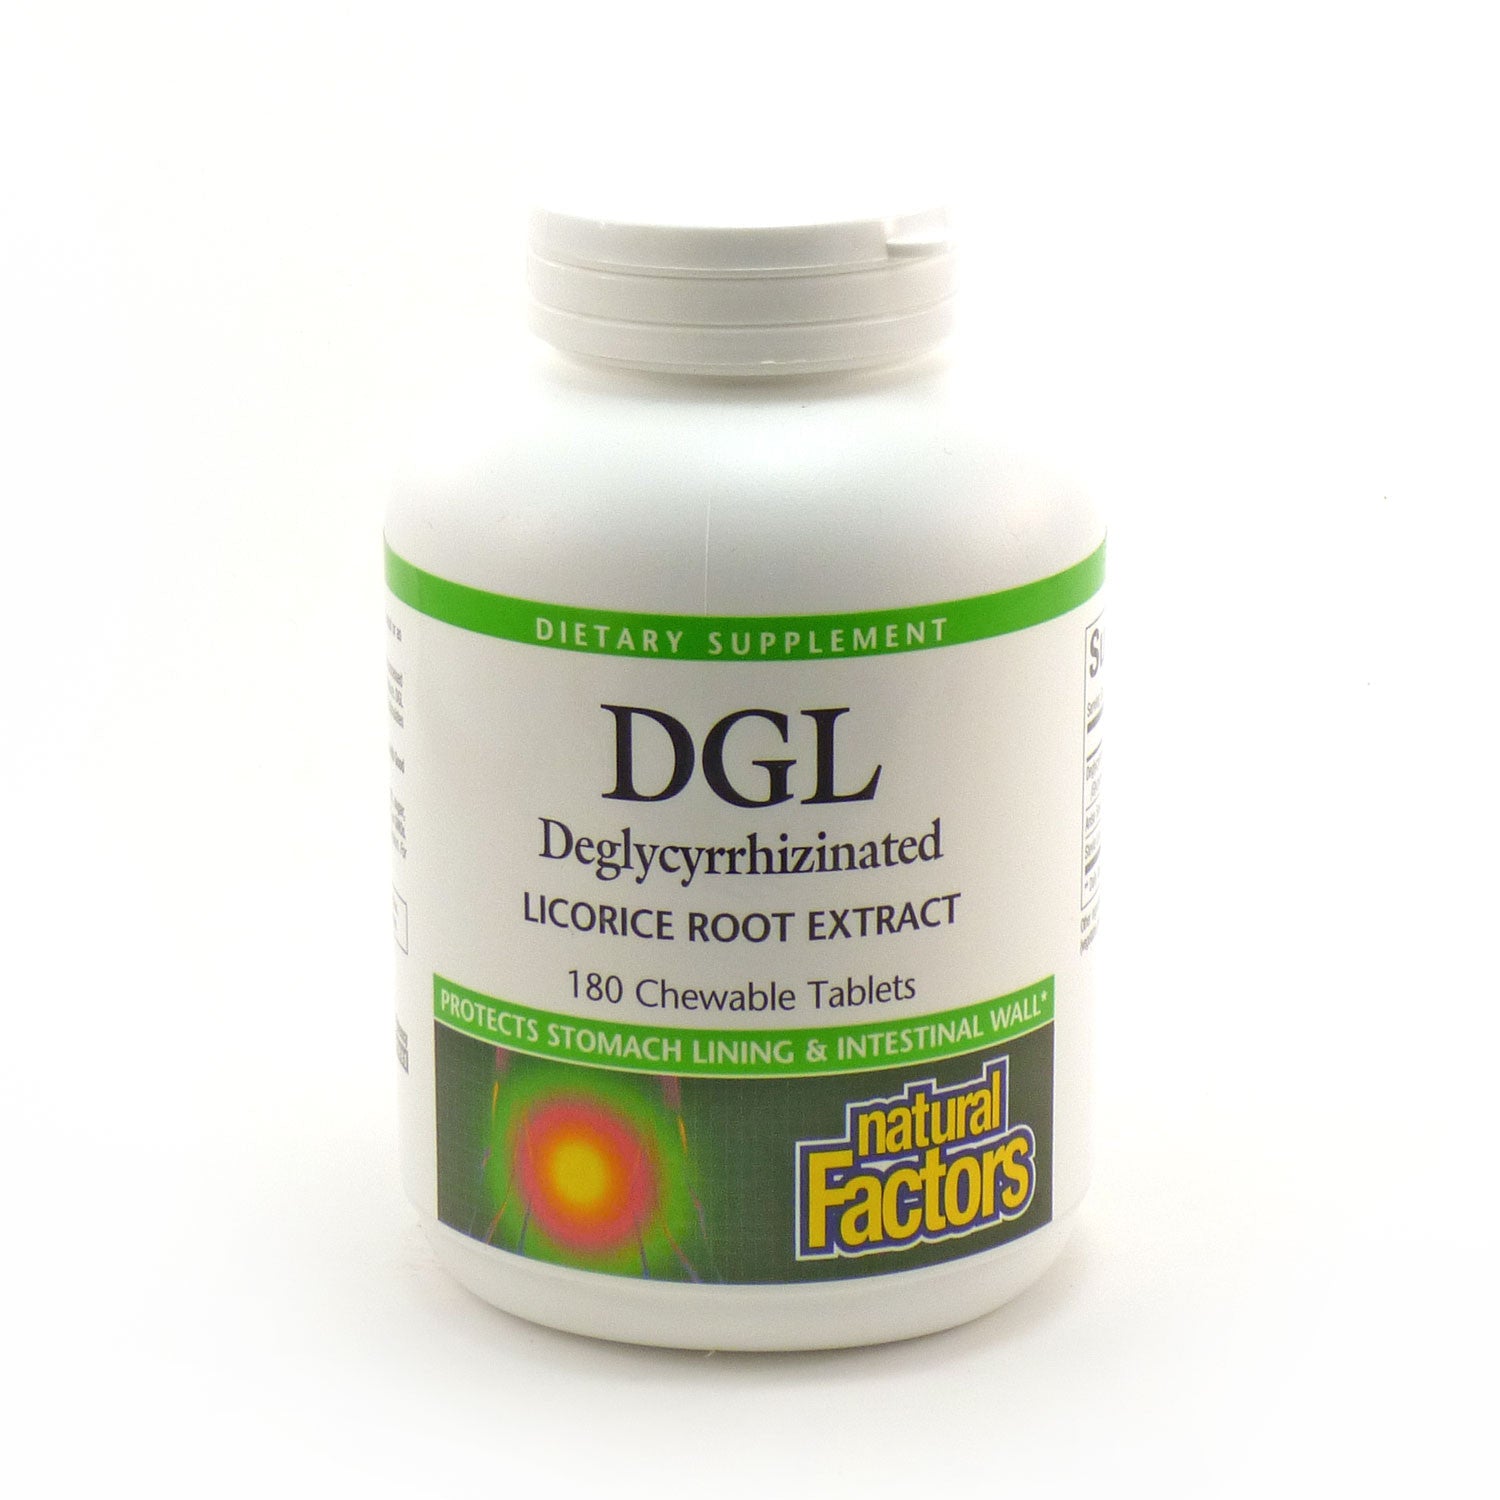 Natural Factors DGL Deglycyrrhizinated Licorice Root Extract -- 180 Chewable Tablets